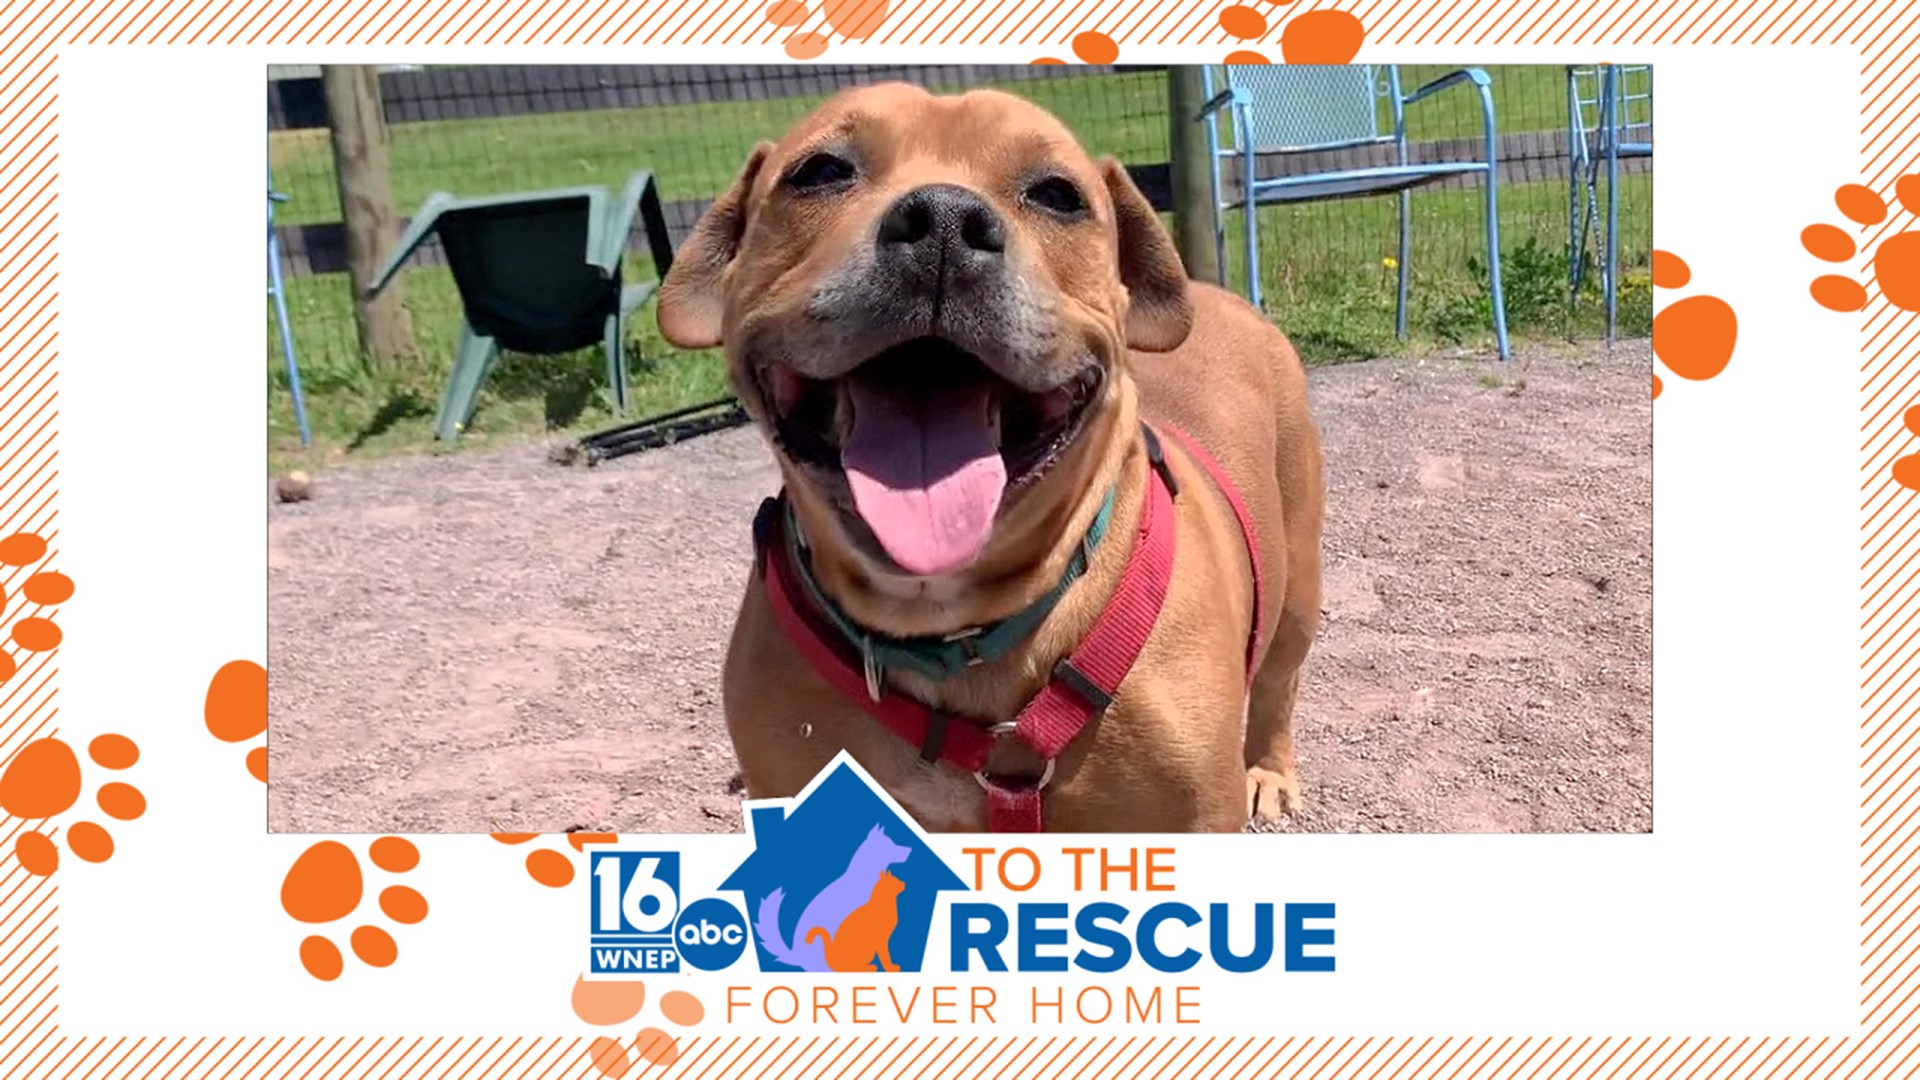 Small but mighty—in this week's 16 To the Rescue, Ally Gallo introduces us to Debow, a sweet and strong pup looking for a forever home.